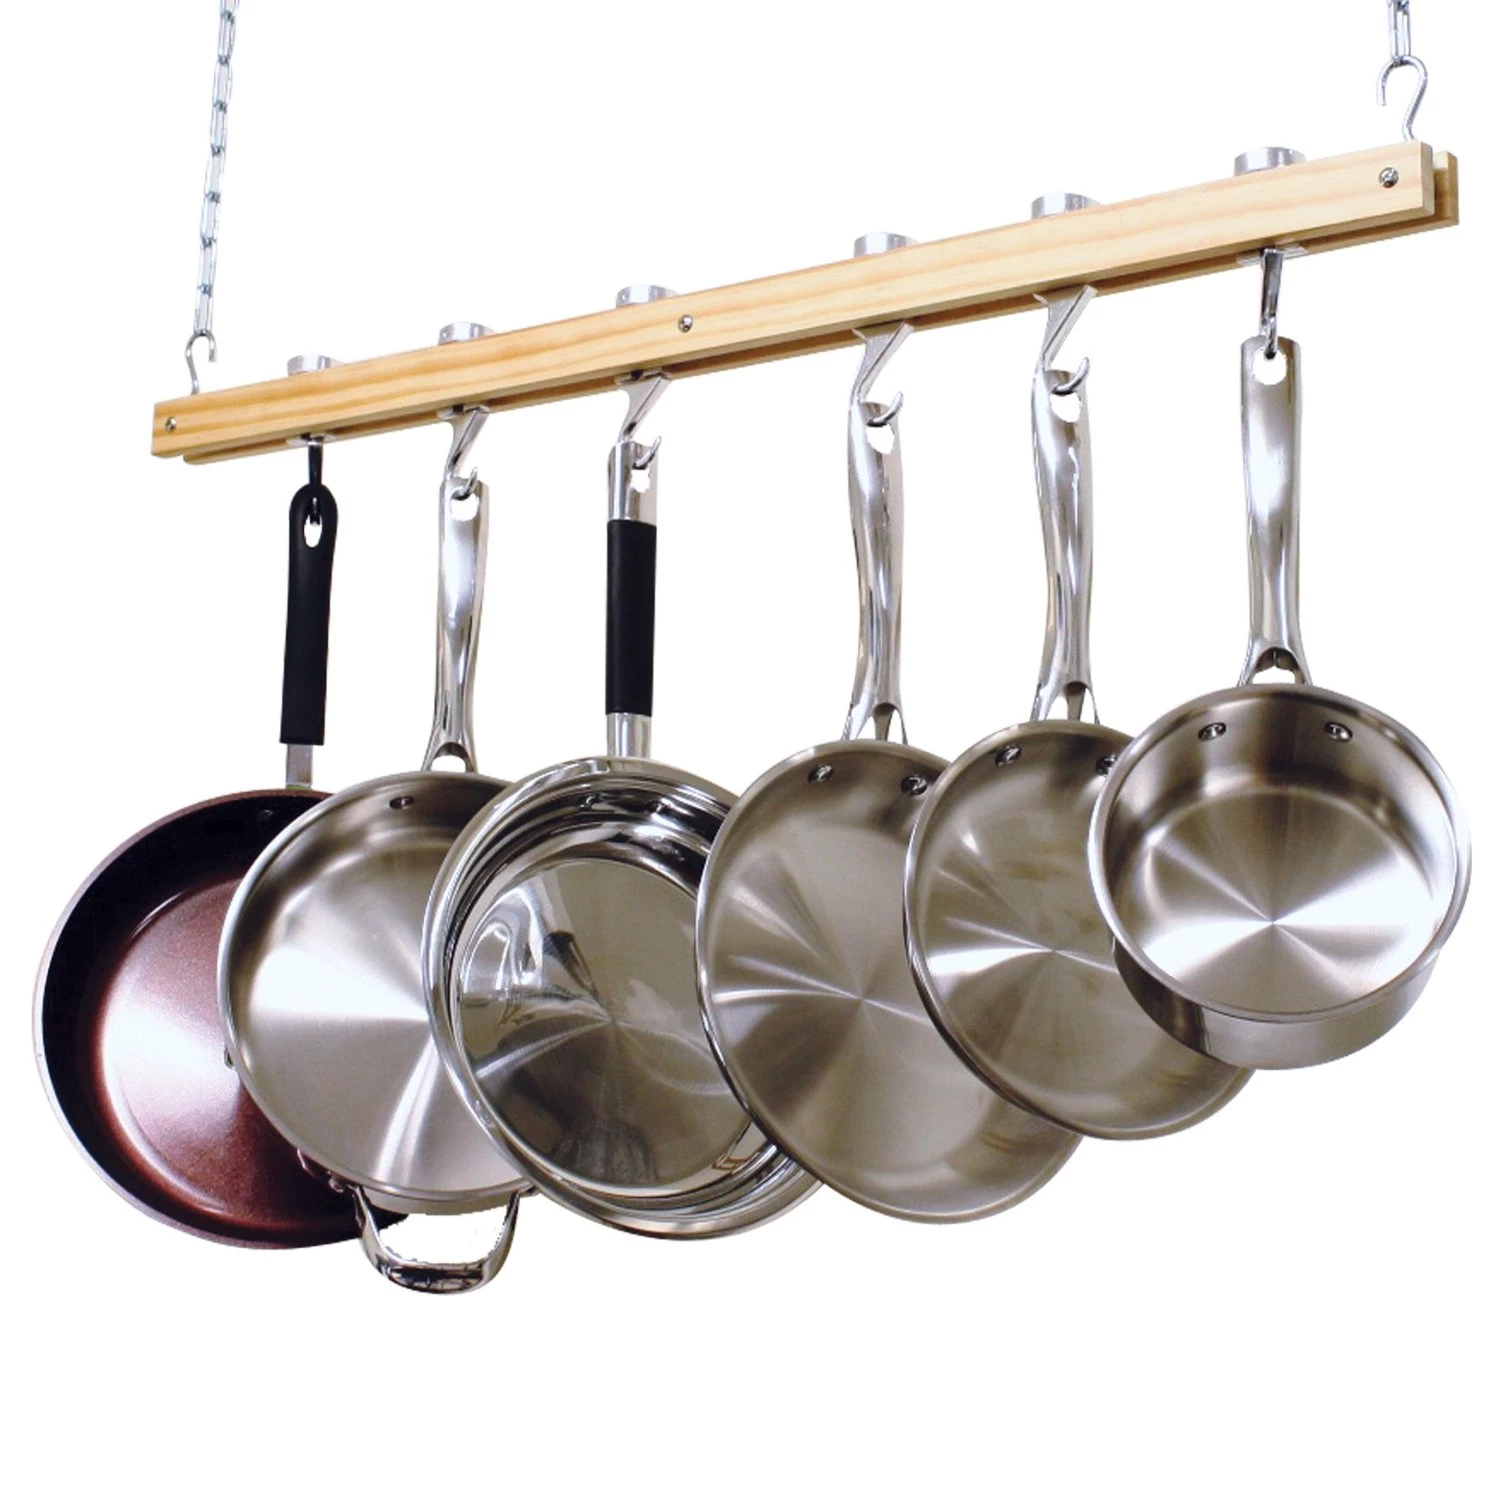 How to Organize your Pots and Pans - Hanging pot rack